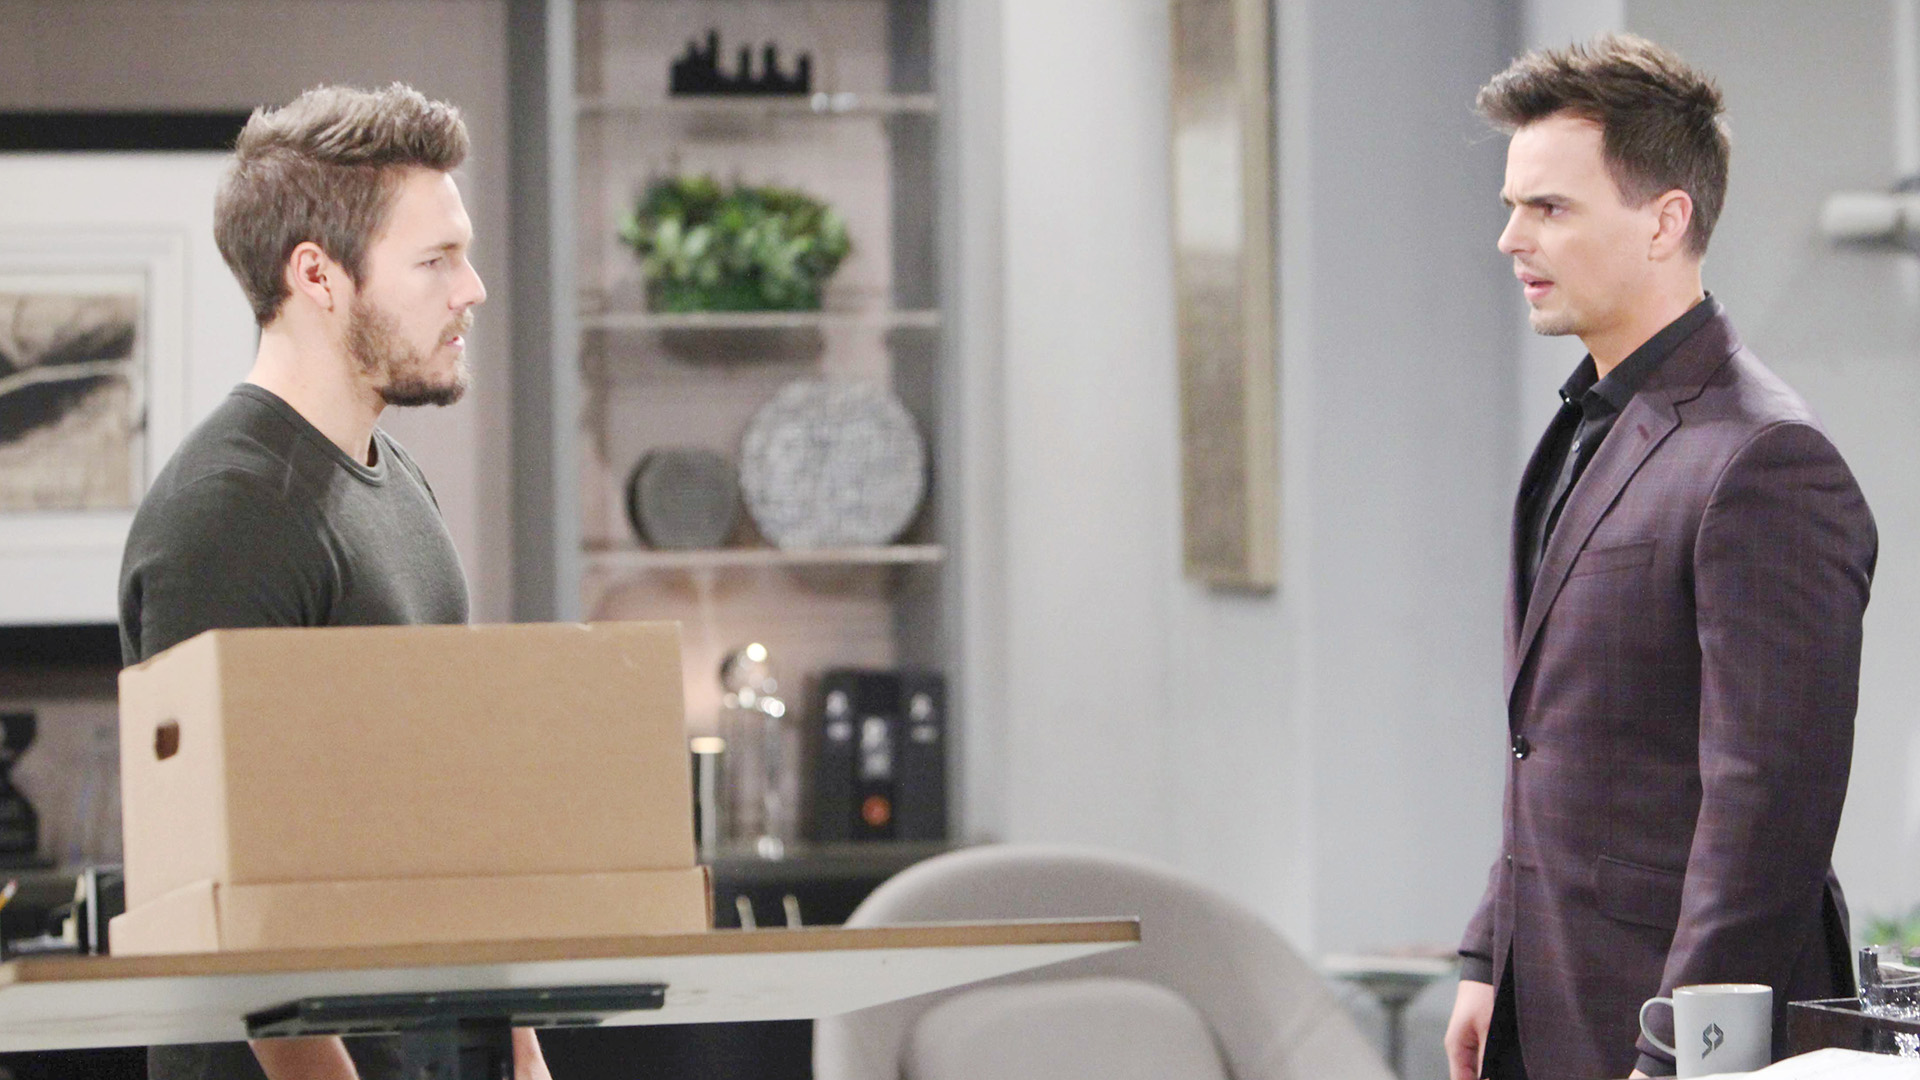 Liam floors Wyatt by sharing the news that their father, Bill, slept with Liam's wife, Steffy.